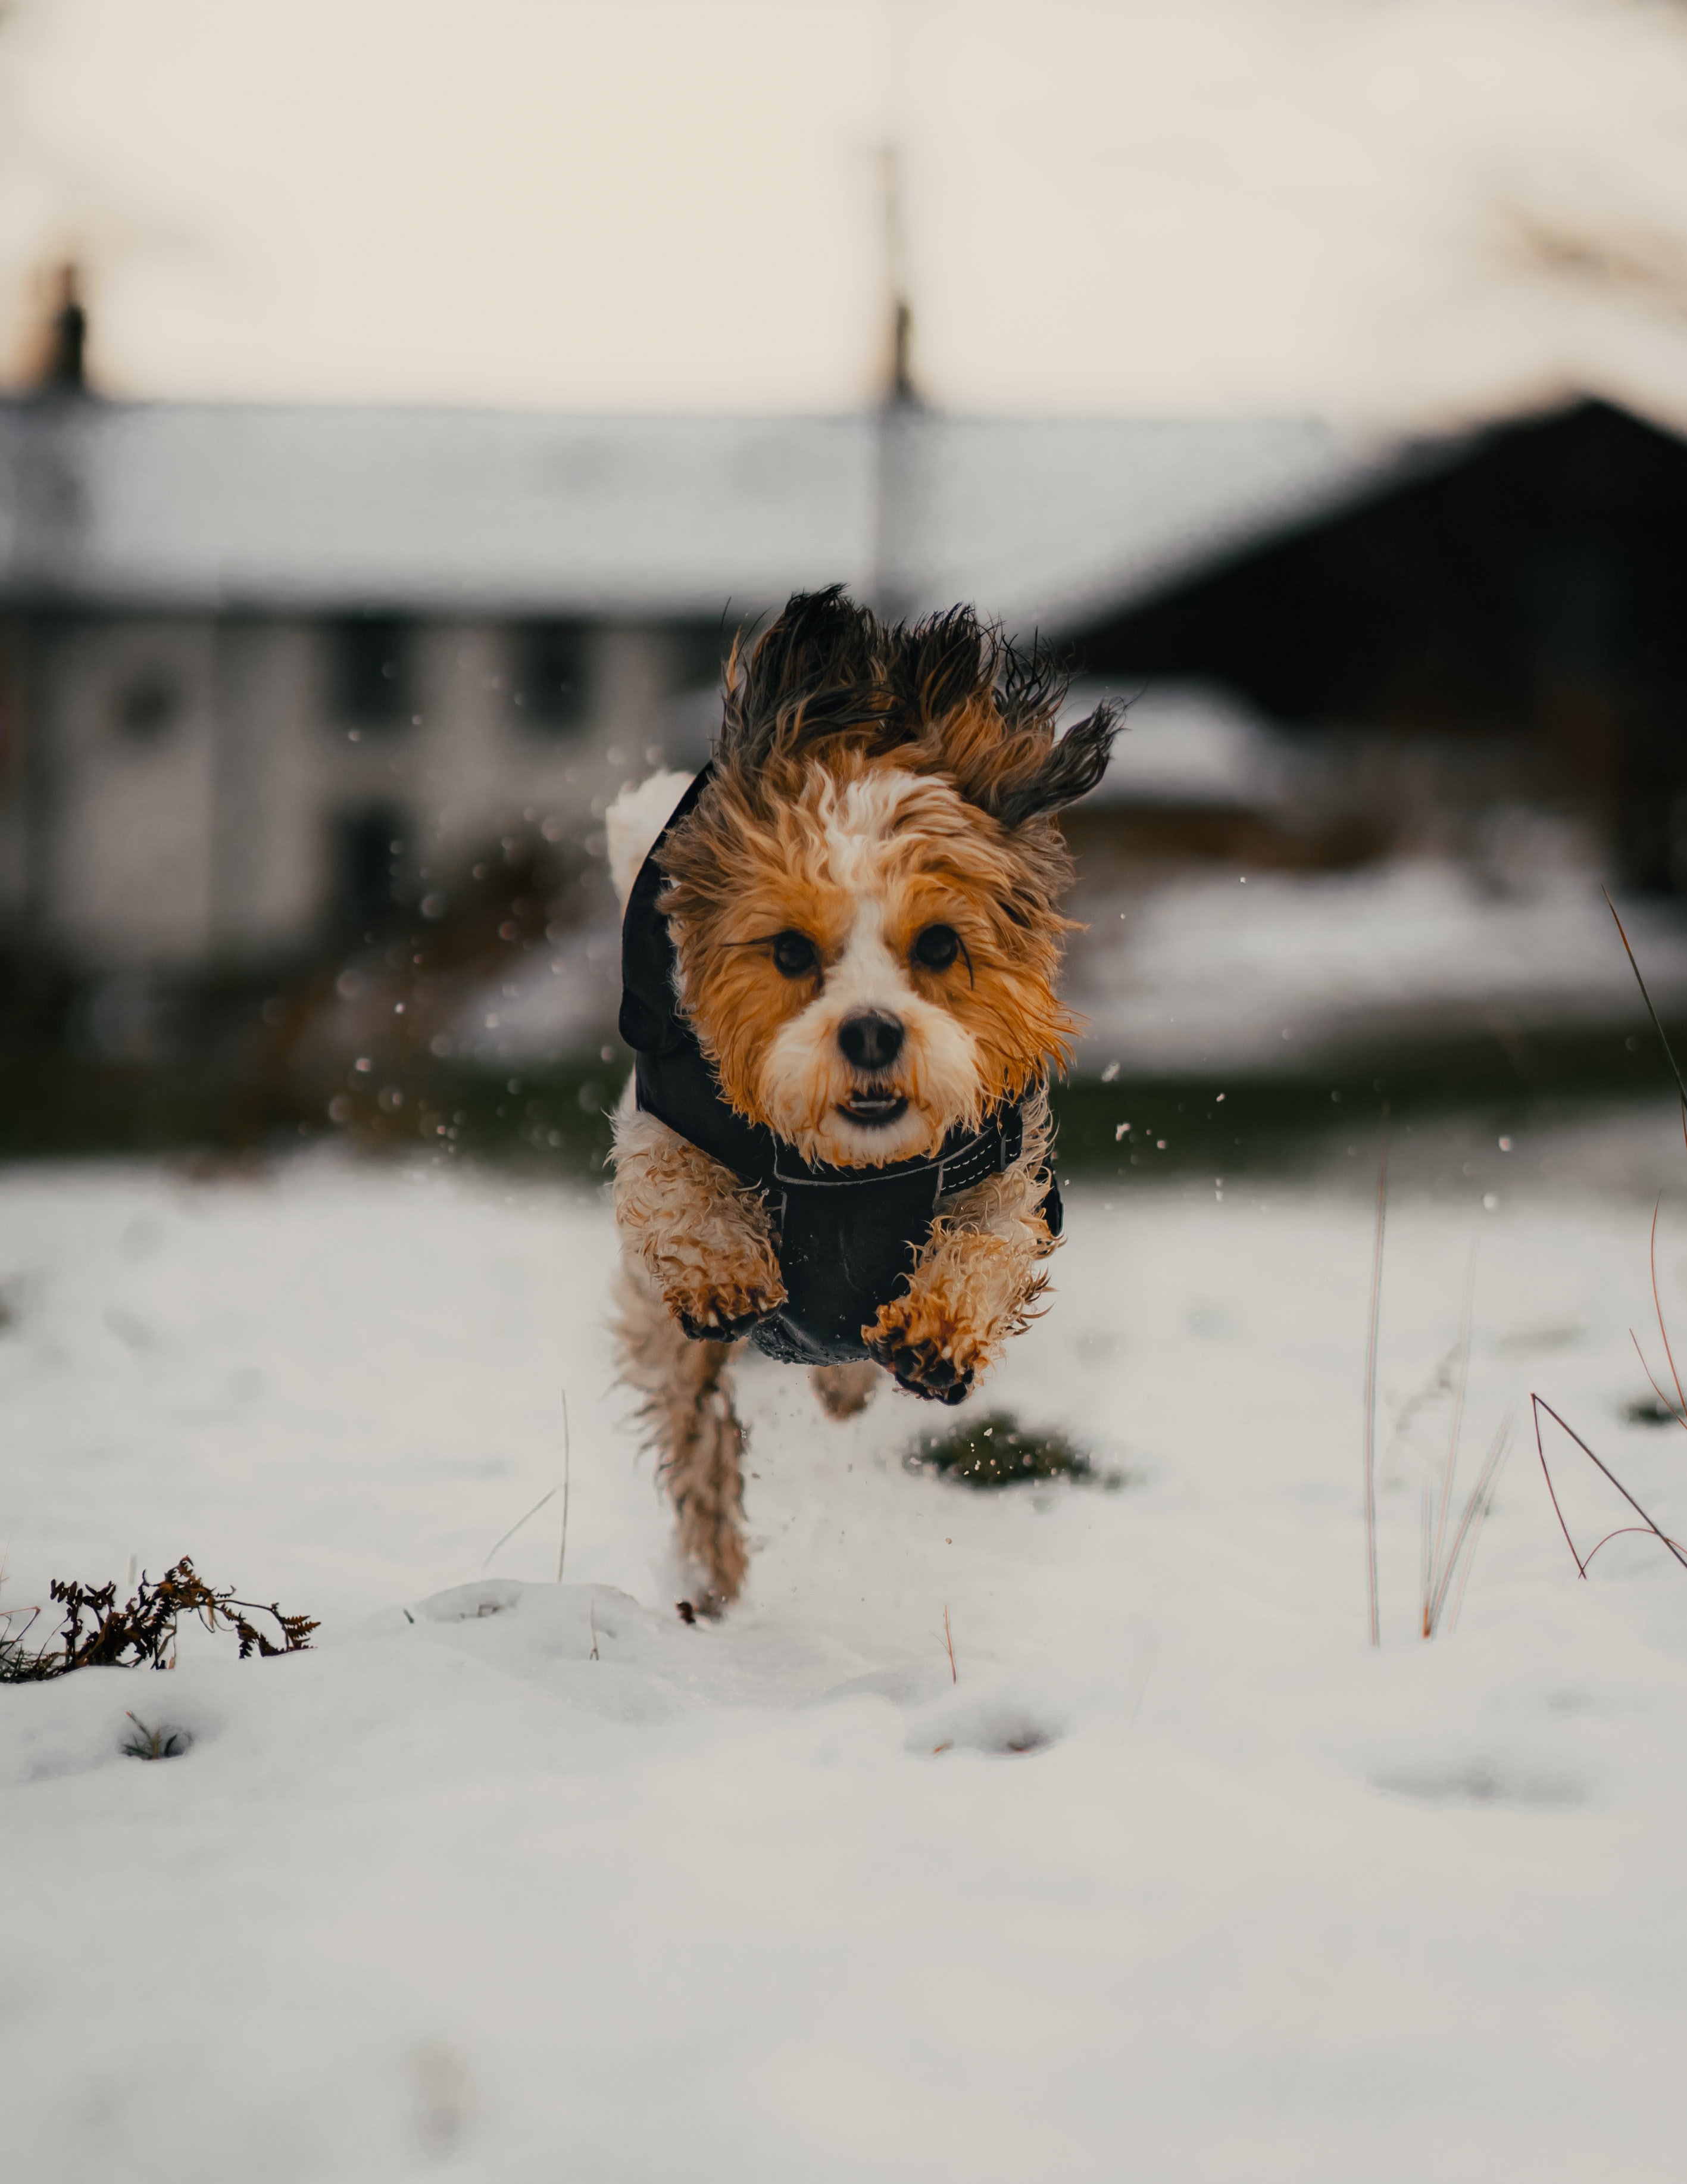 65296 download wallpaper puppy, funny, animals, snow, dog screensavers and pictures for free